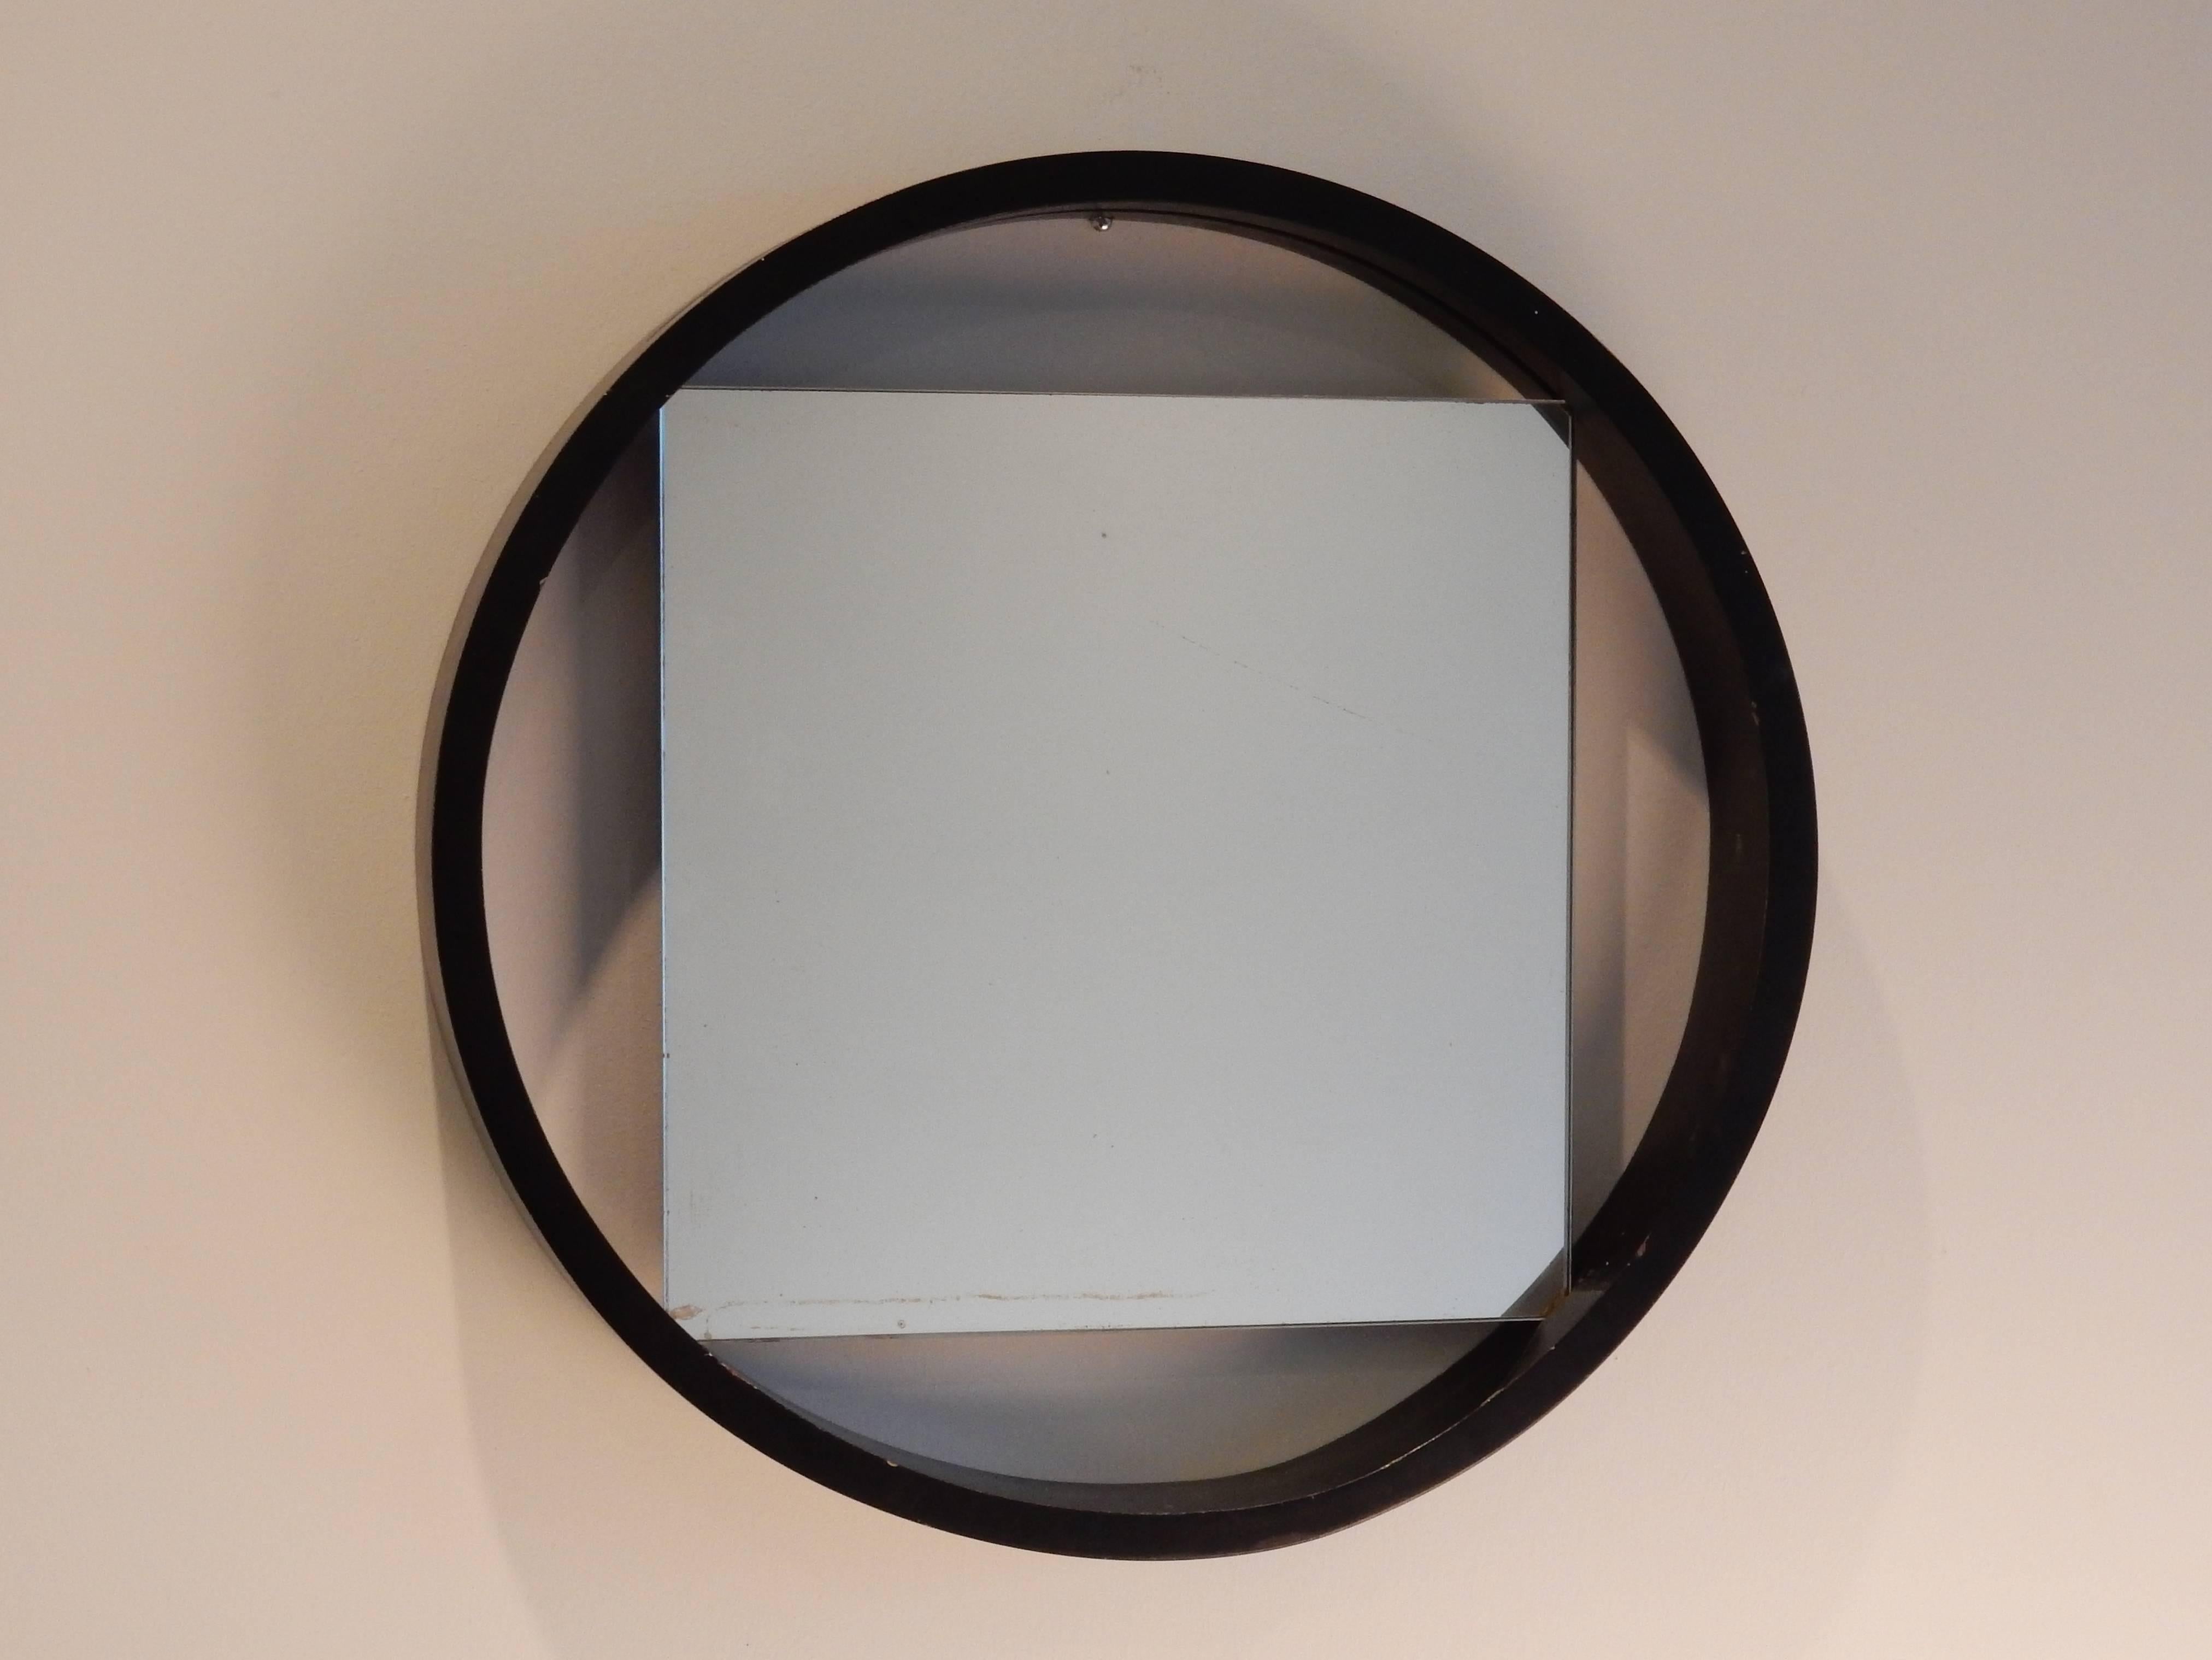 Lacquered Iconic 1950s Black and White Modernist Mirror by Benno Premsela for 't Spectrum